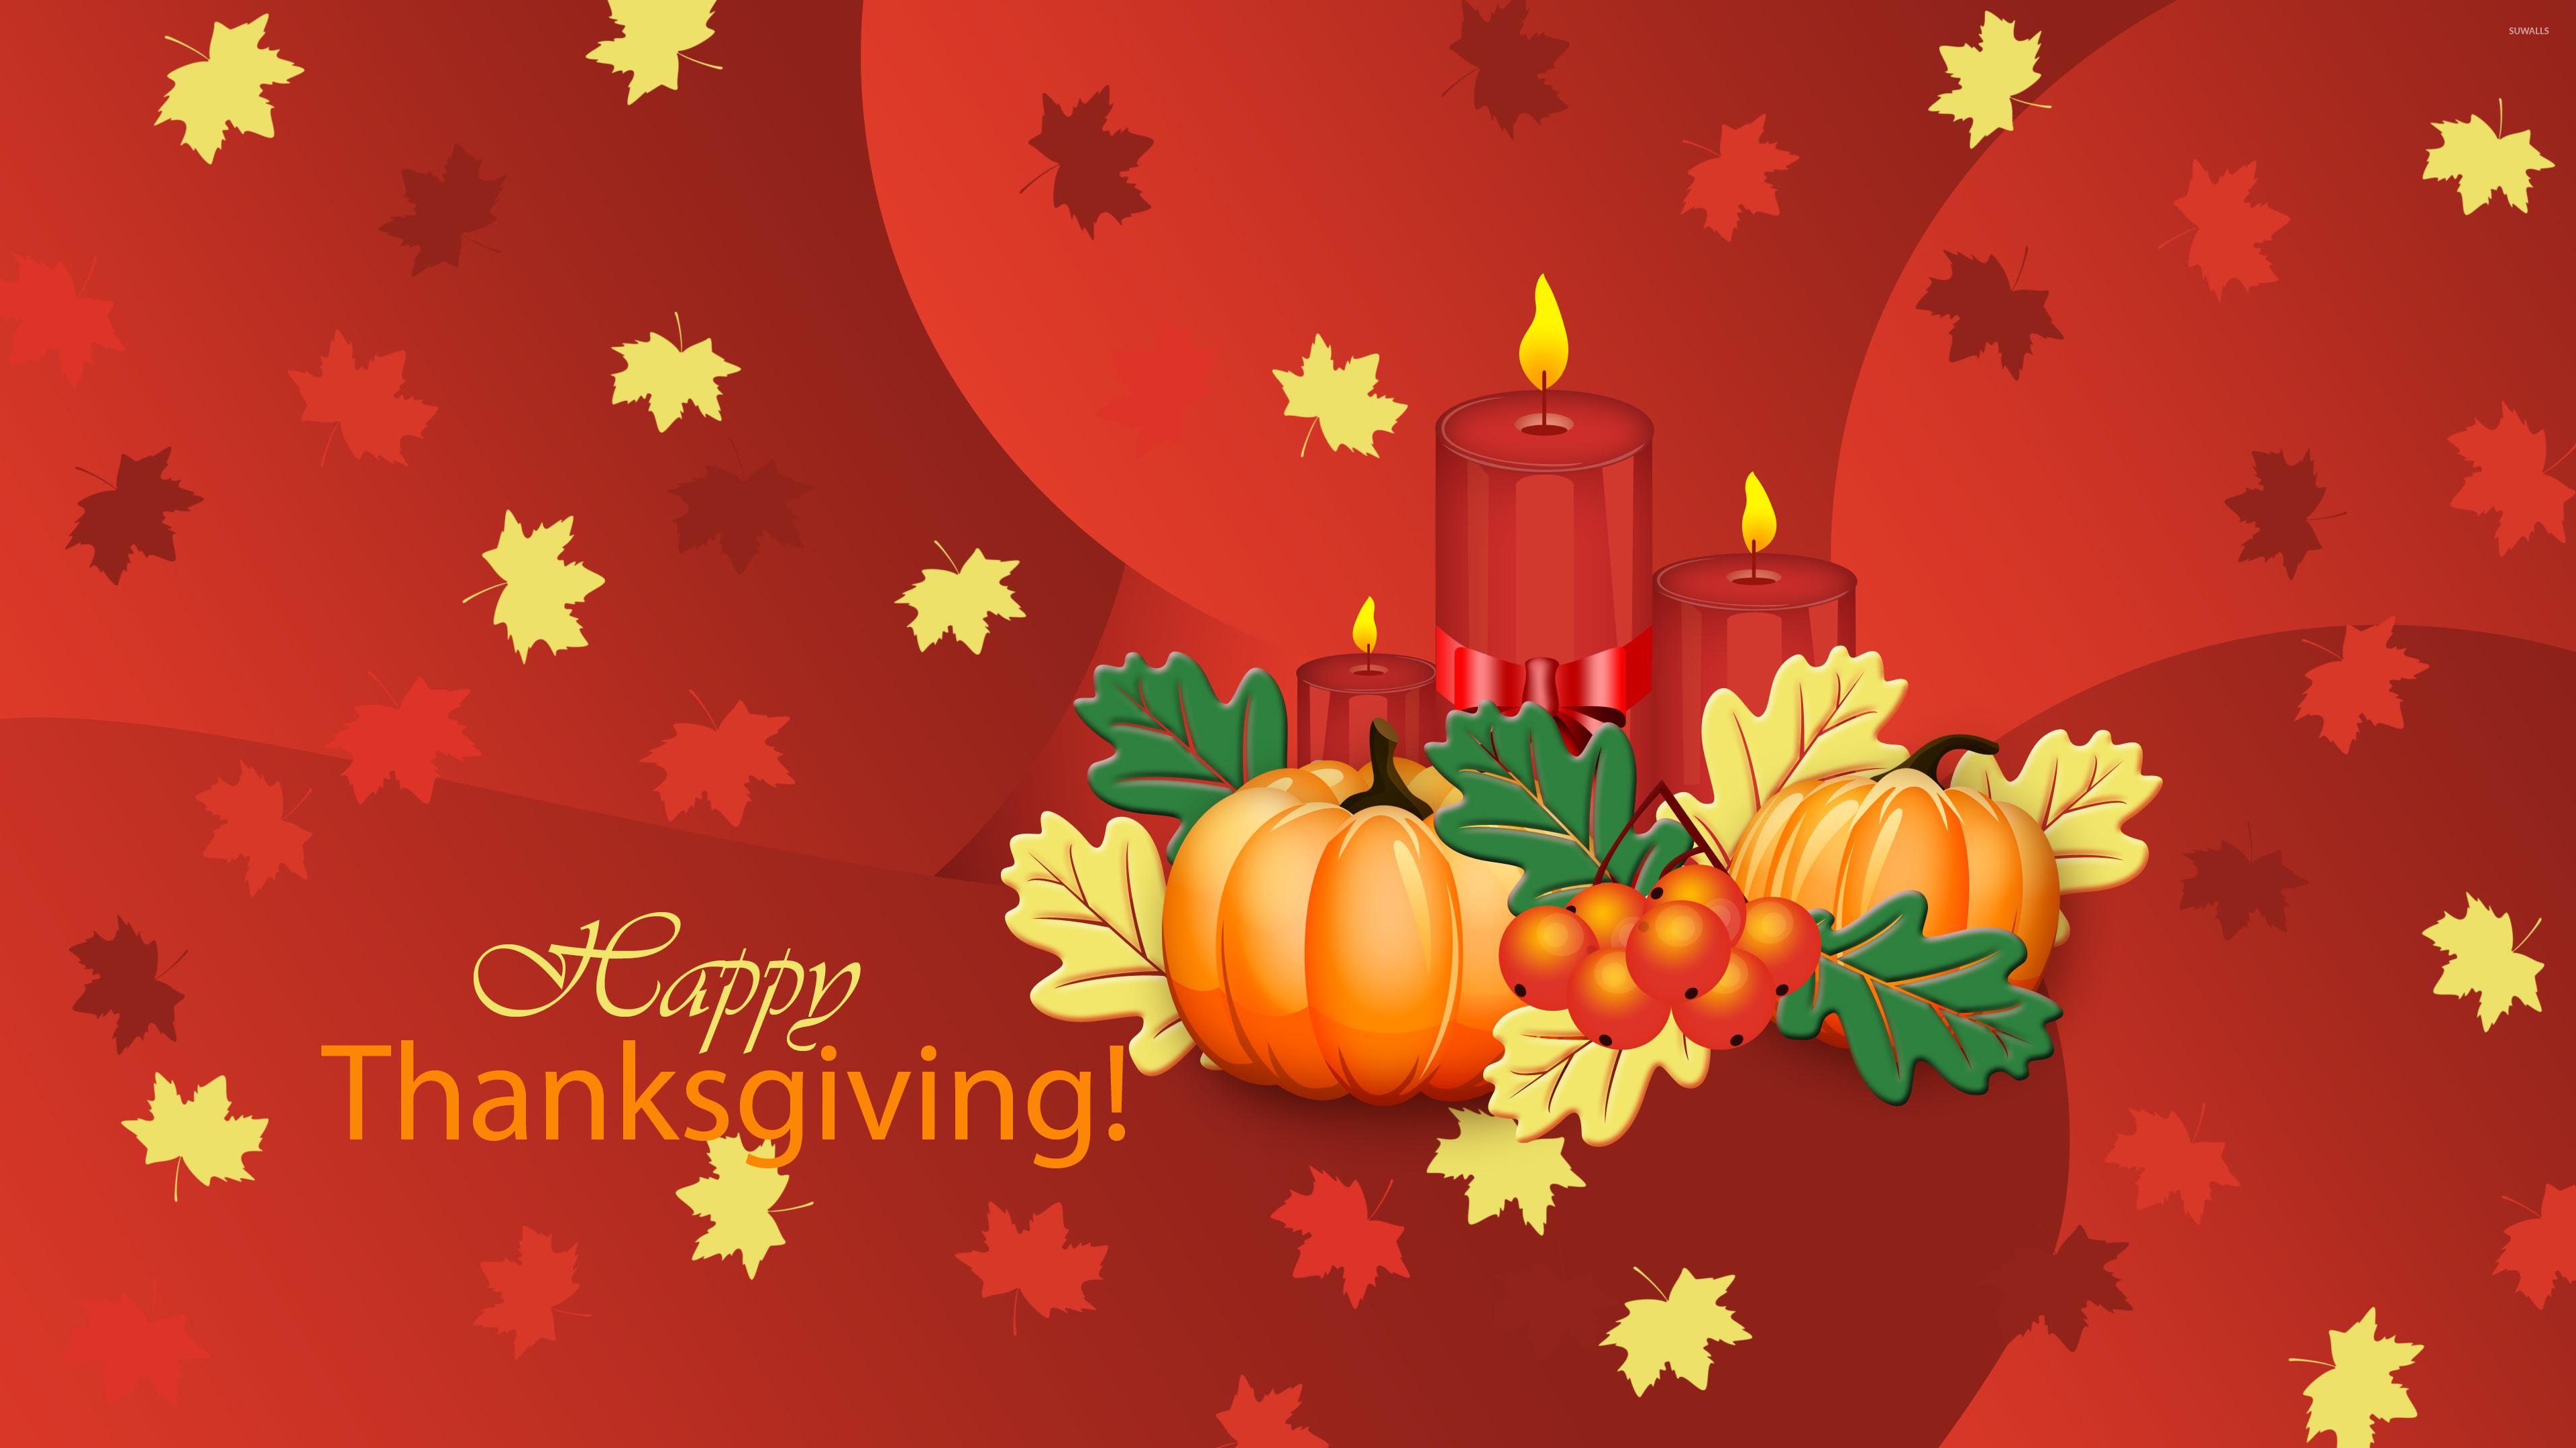 Pumpkins And Candles On Thanksgiving Wallpaper Holiday